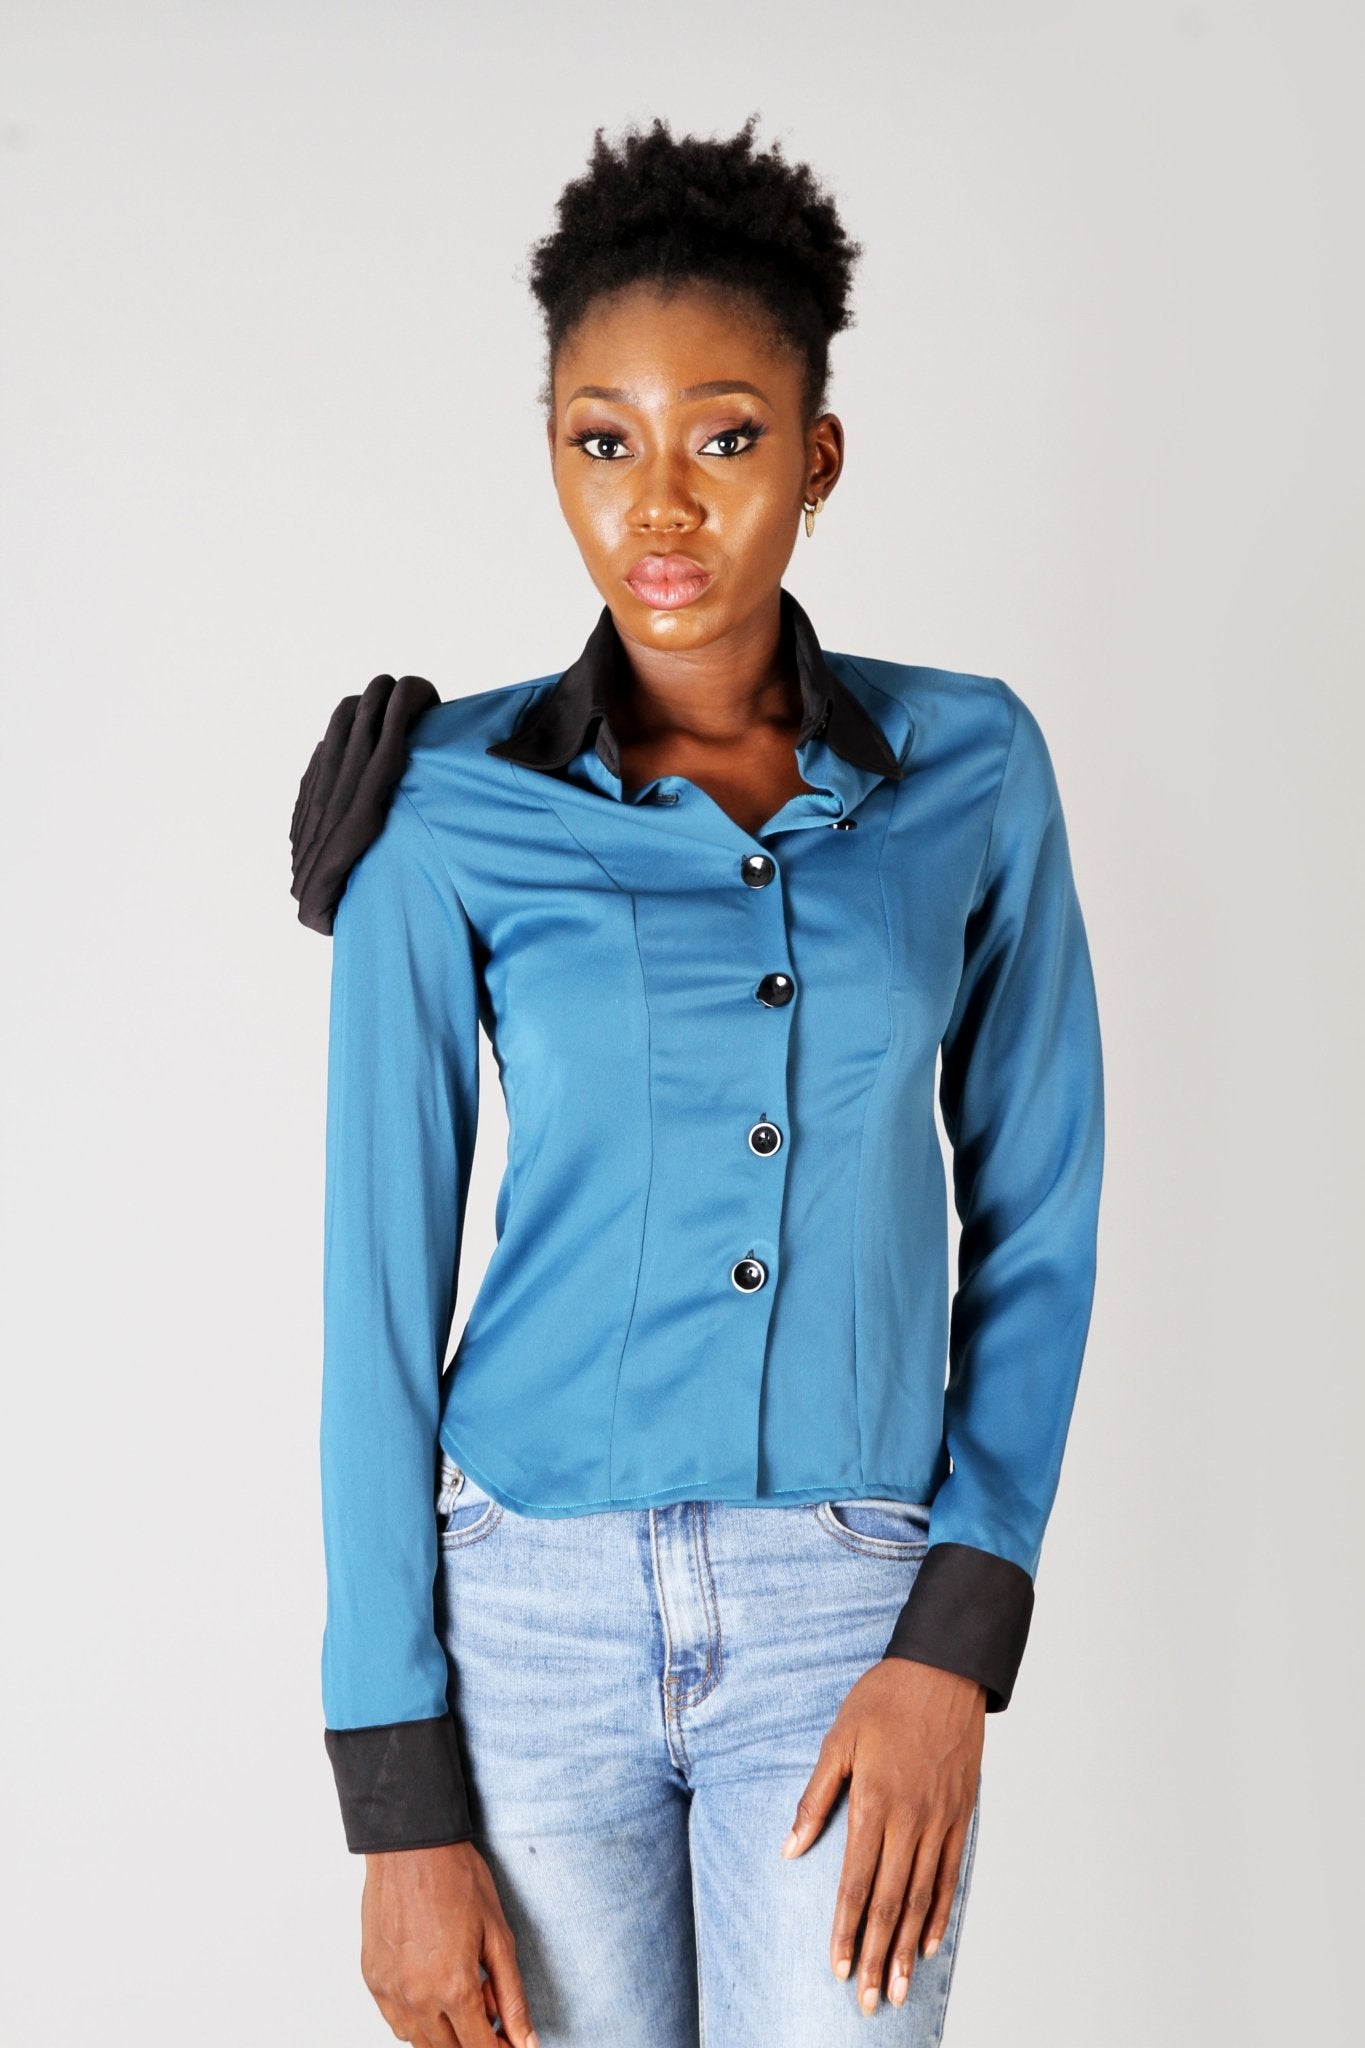 Blue Black Rose Long Sleeve Fitted Statement Shirt Top - Africanclothinghub UK, US, Canada